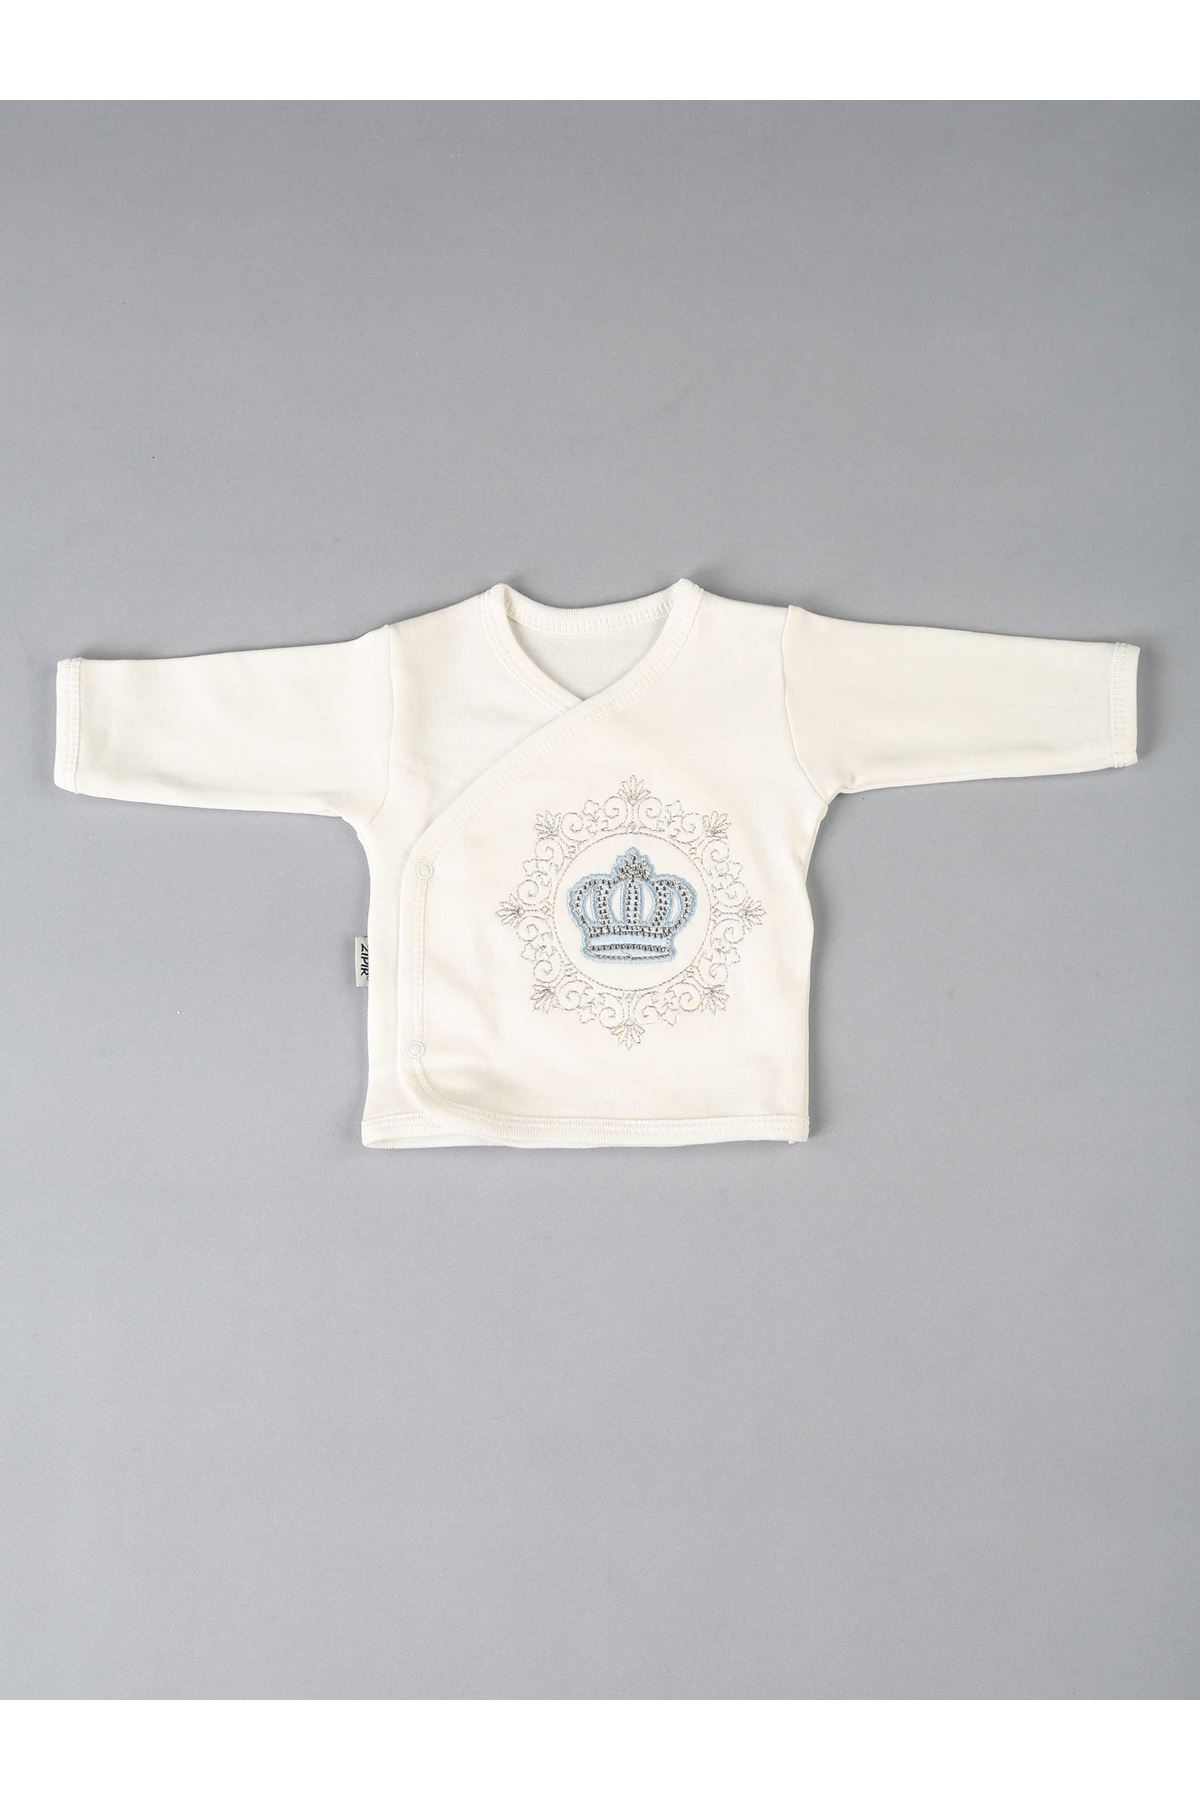 Blue King Crown Baby Boy Newborn Prince Suit 10 Pieces Newborn Babies Boys Clothing Needs Set Cotton Fabric High quality clothes